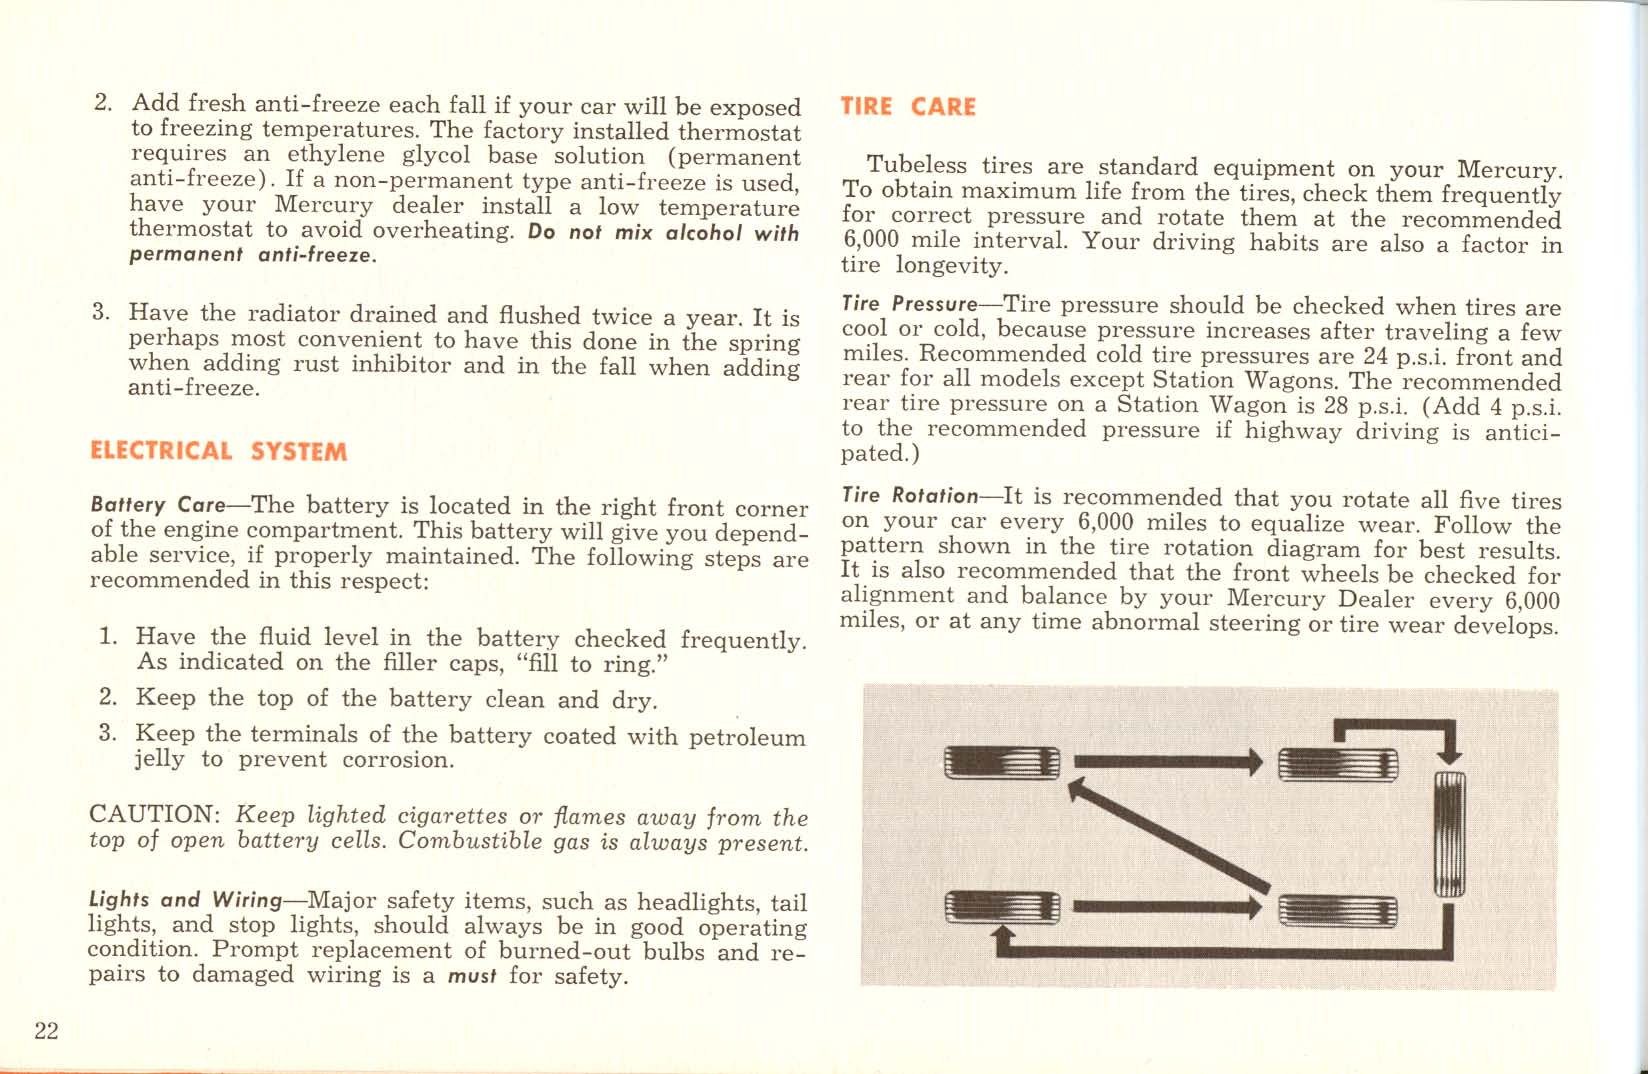 1961 Mercury Owners Manual Page 9